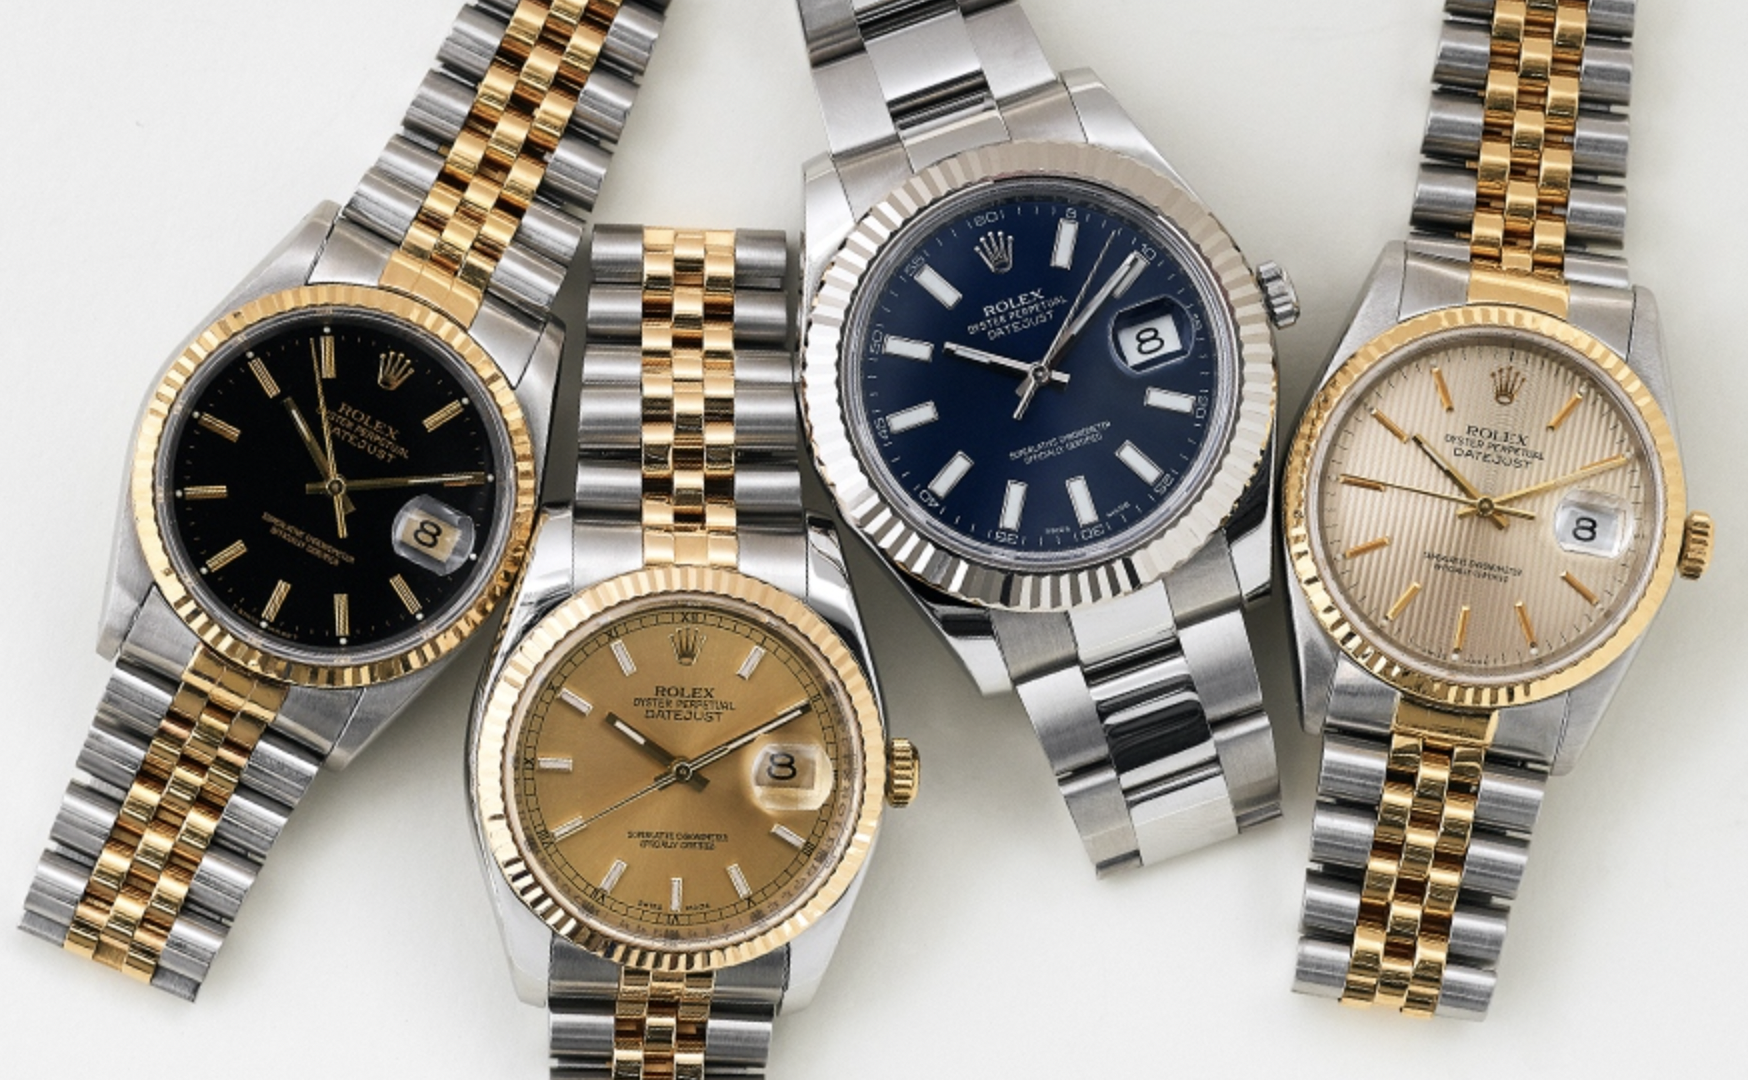 How to Verify the Authenticity of Your Rolex Datejust Watch